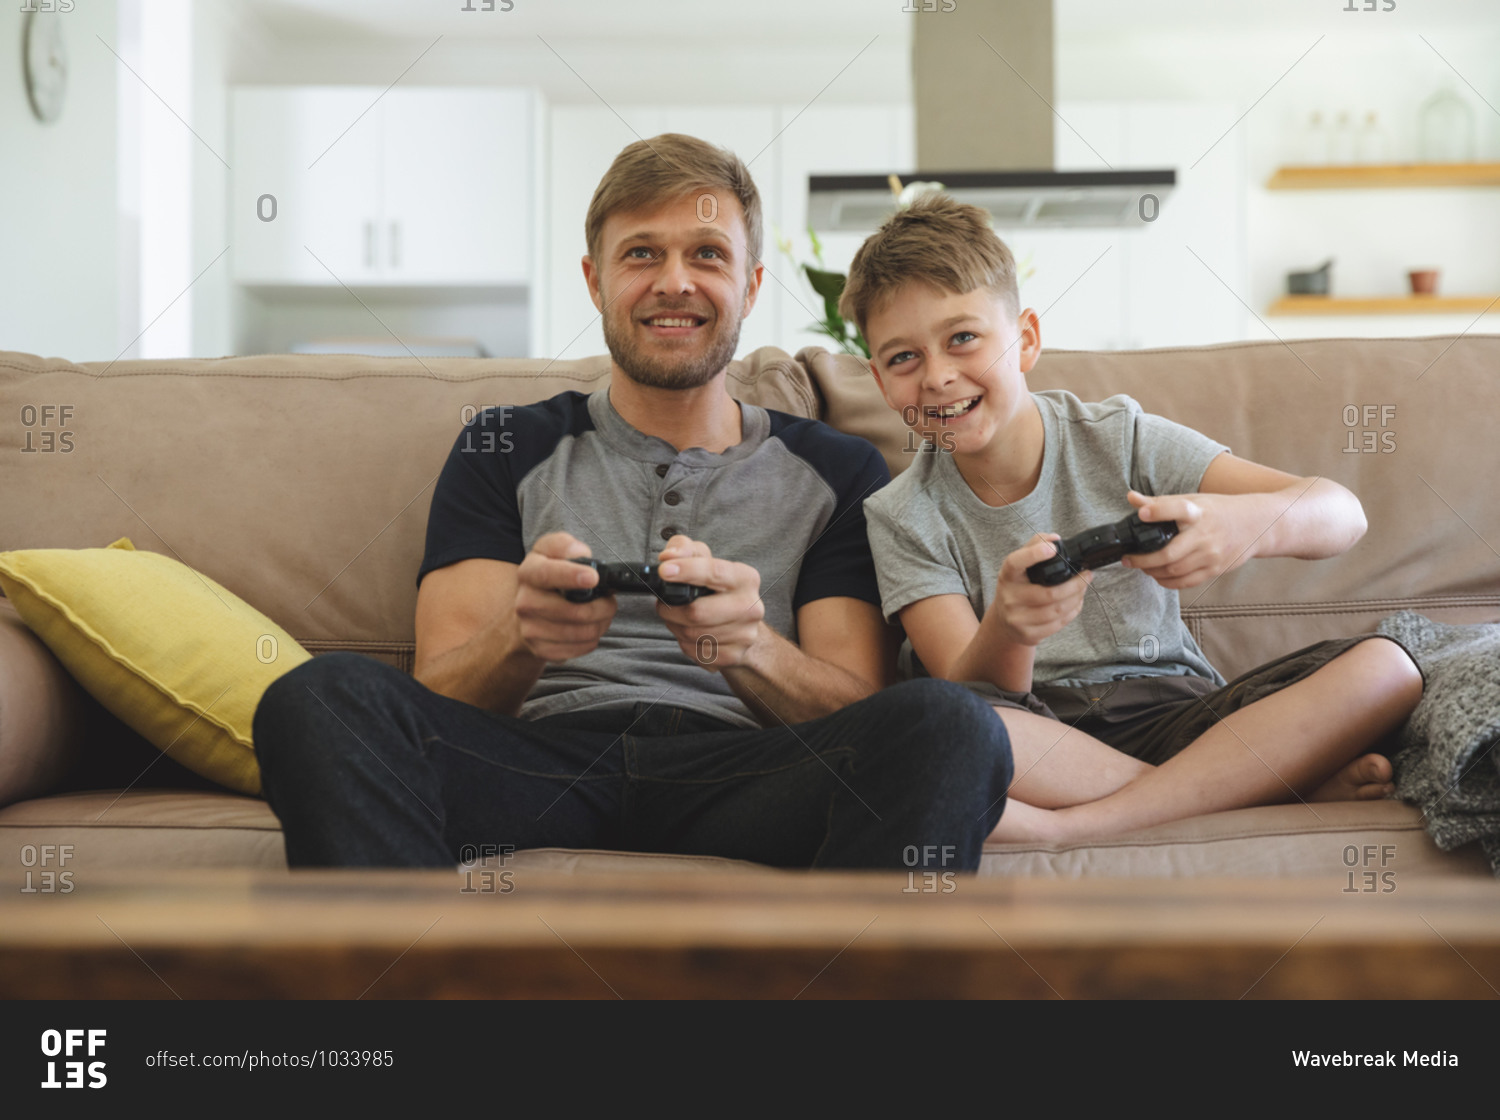 Caucasian man at home with his son together, sitting on sofa in living room, playing video games, smiling. Social distancing during Covid 19 Coronavirus quarantine lockdown.